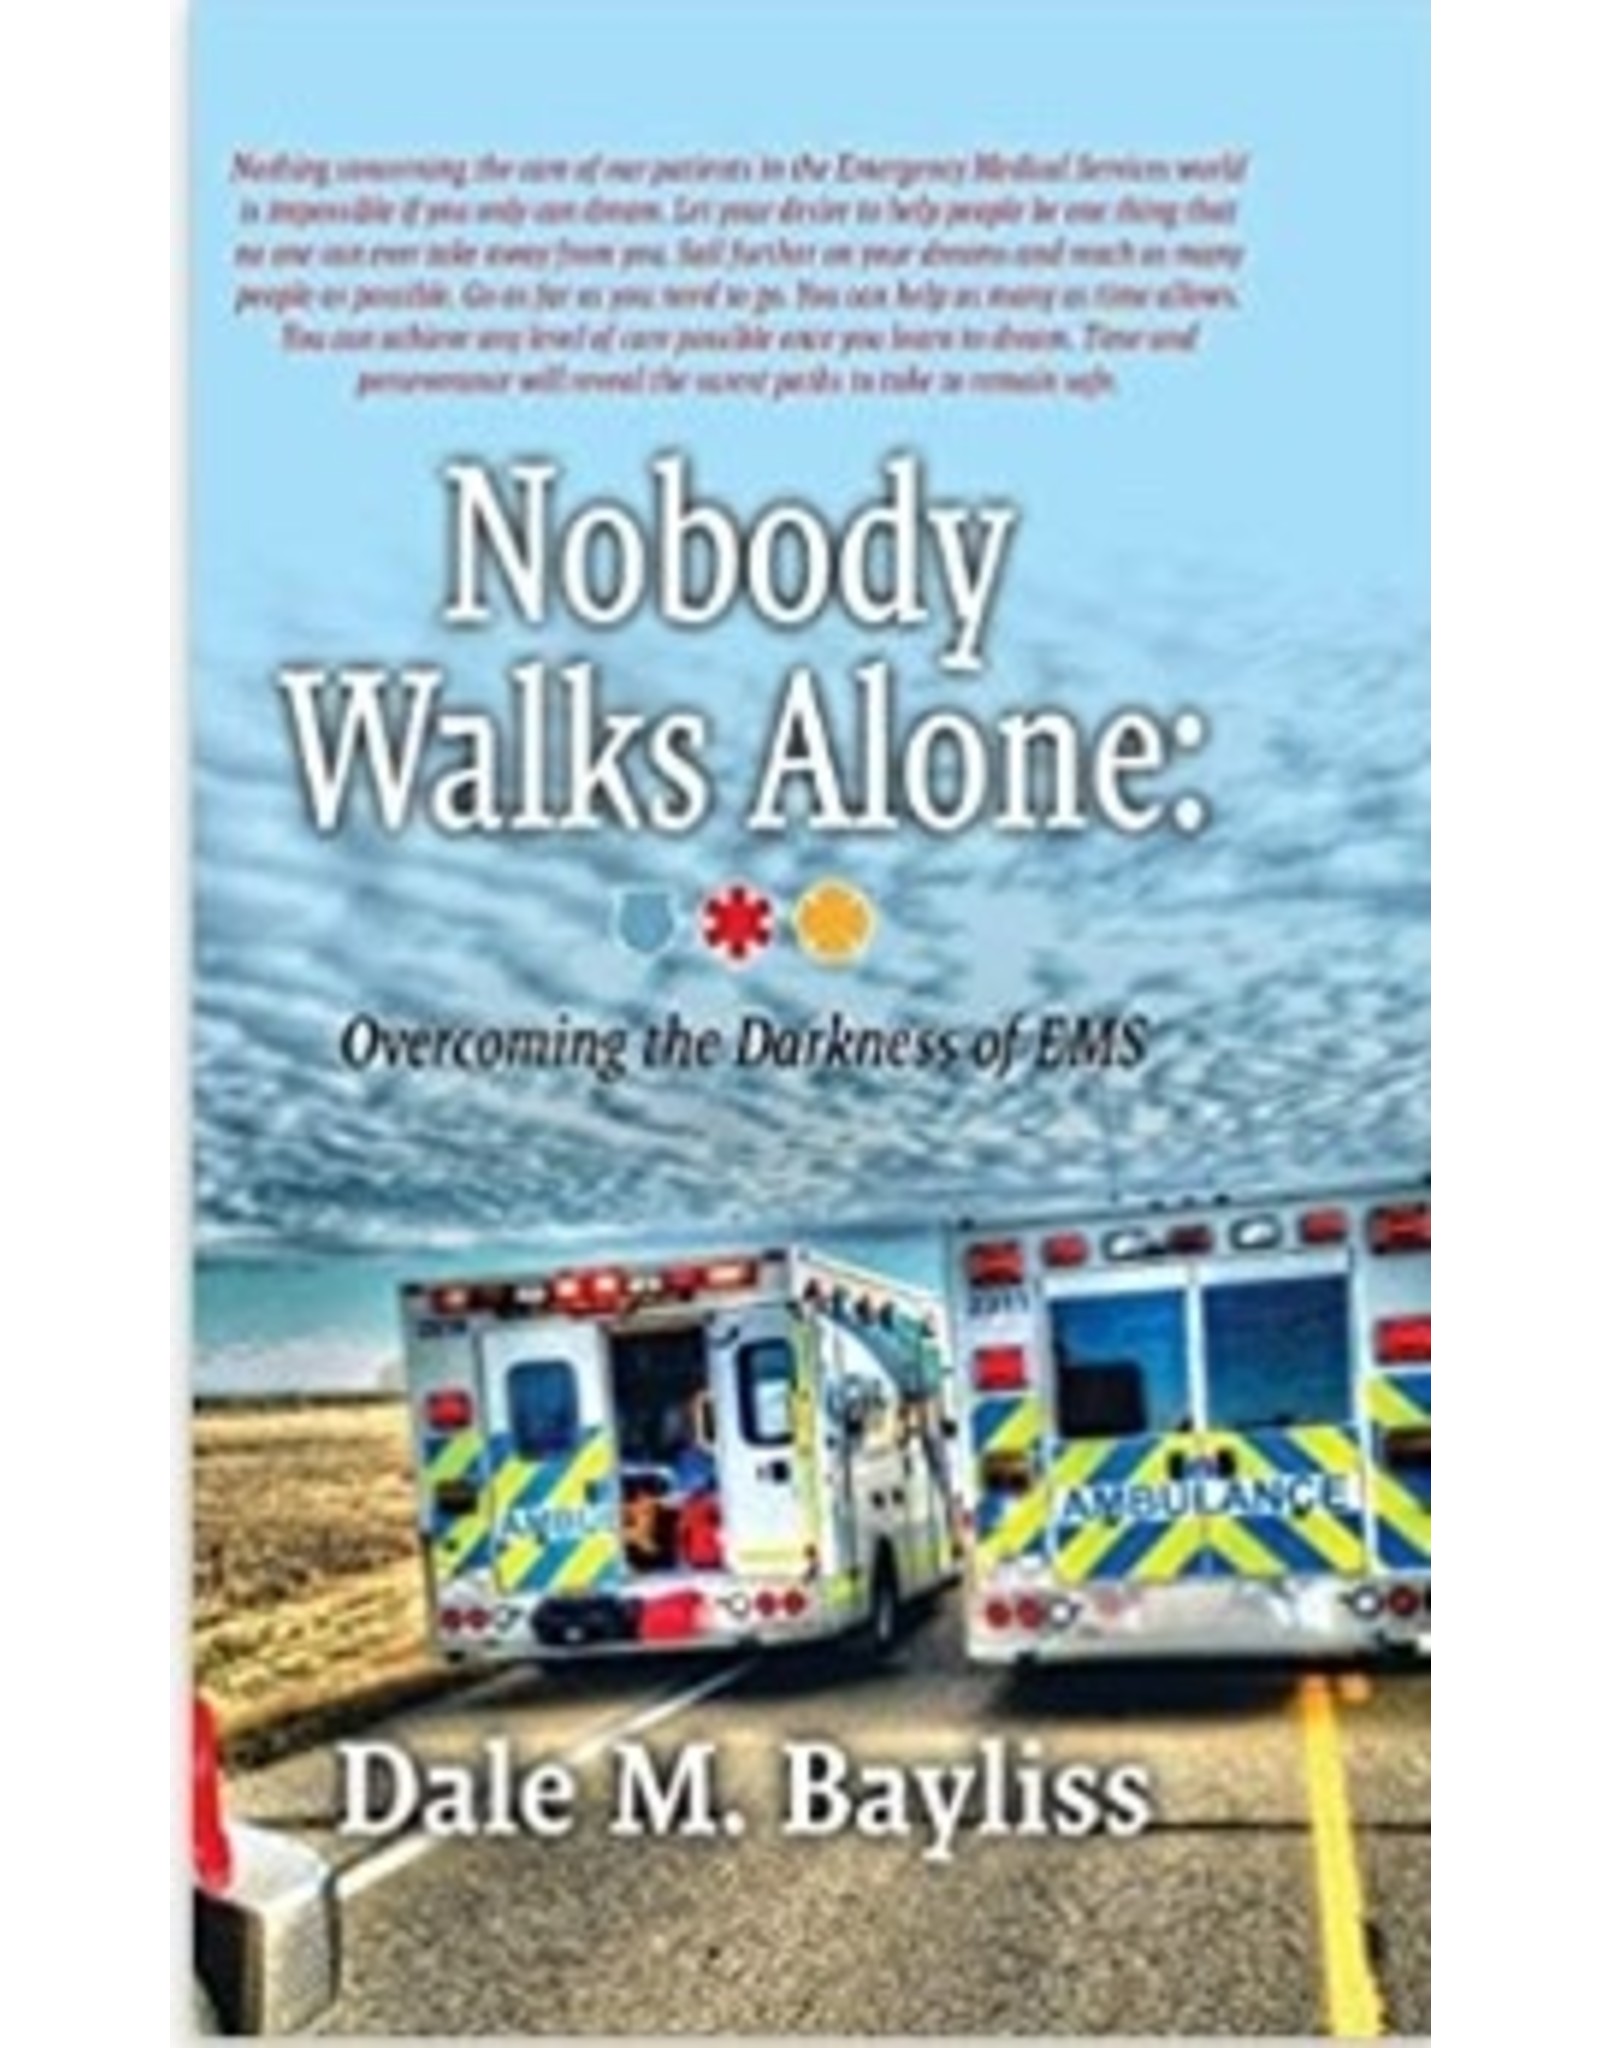 Nobody Walks Alone: Overcoming the Darkness of EMT - by Dale M. Baylis